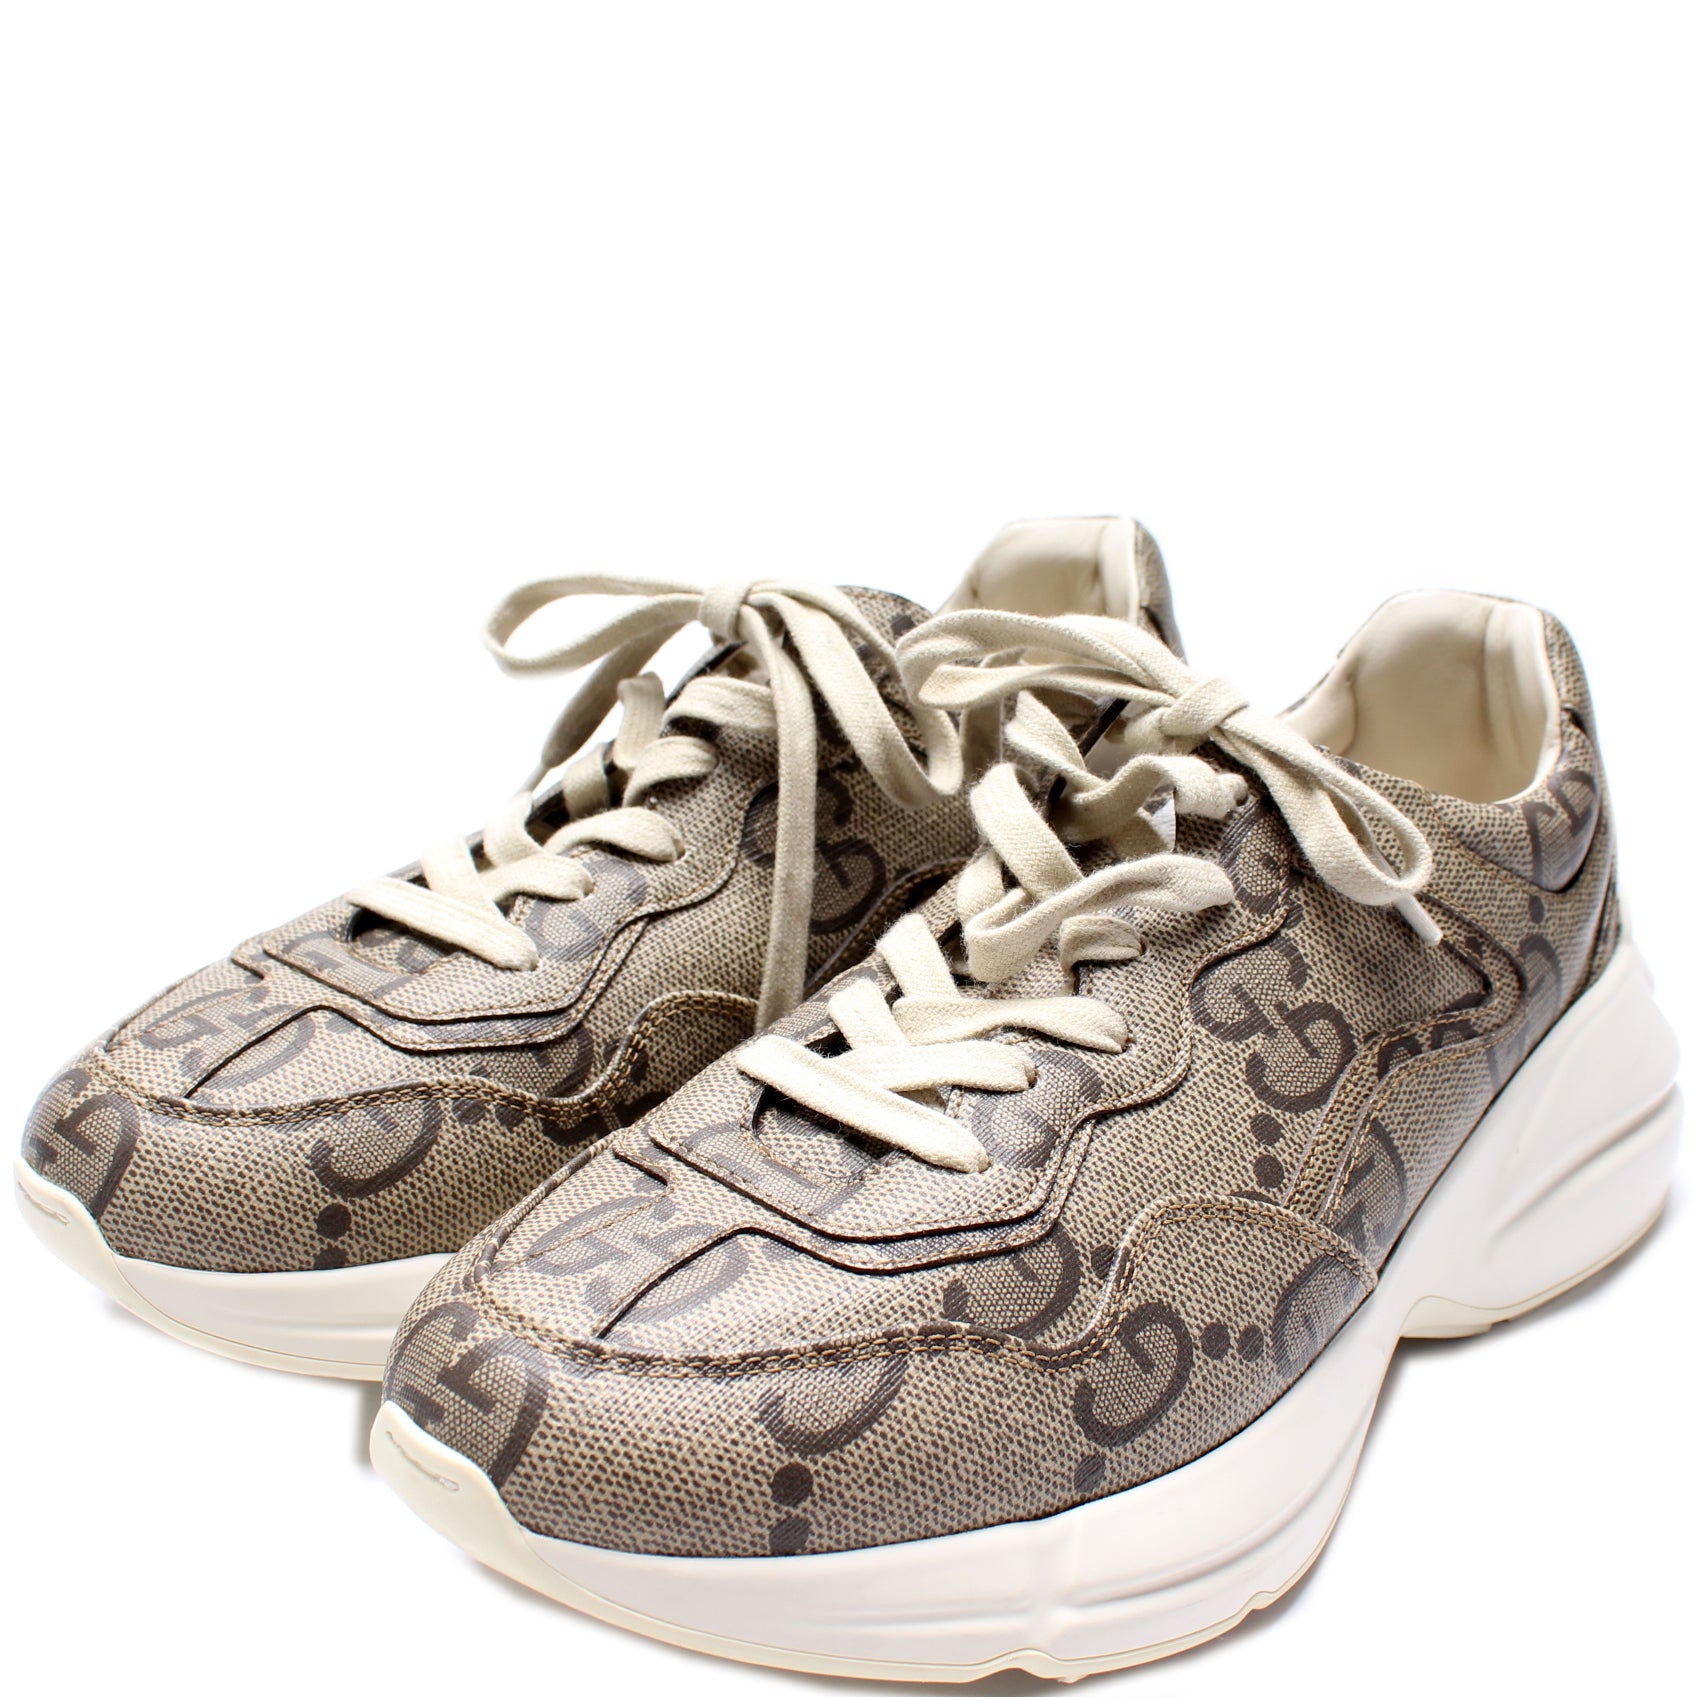 New Gucci Sneakers, Monogram GG Canvas Leather Brown, 75% off